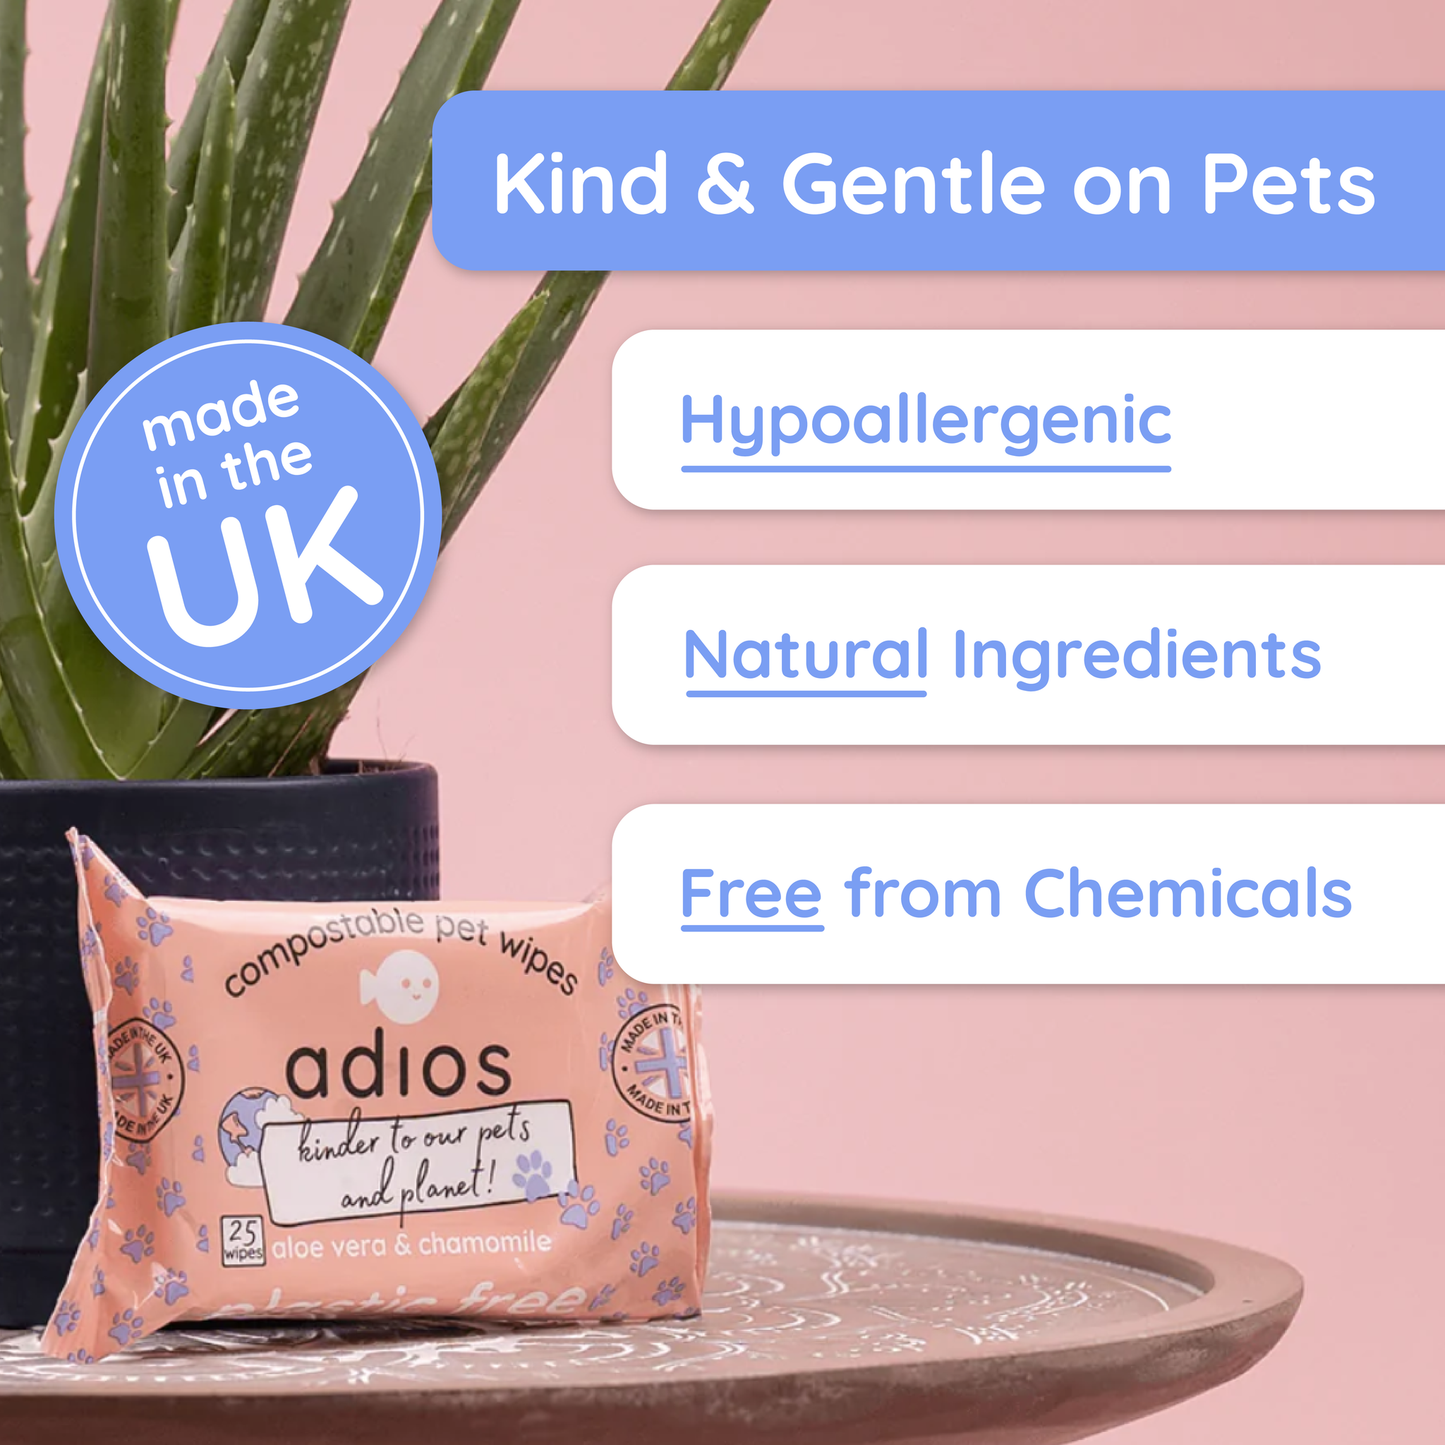 Compostable Pet Wipes by Adios